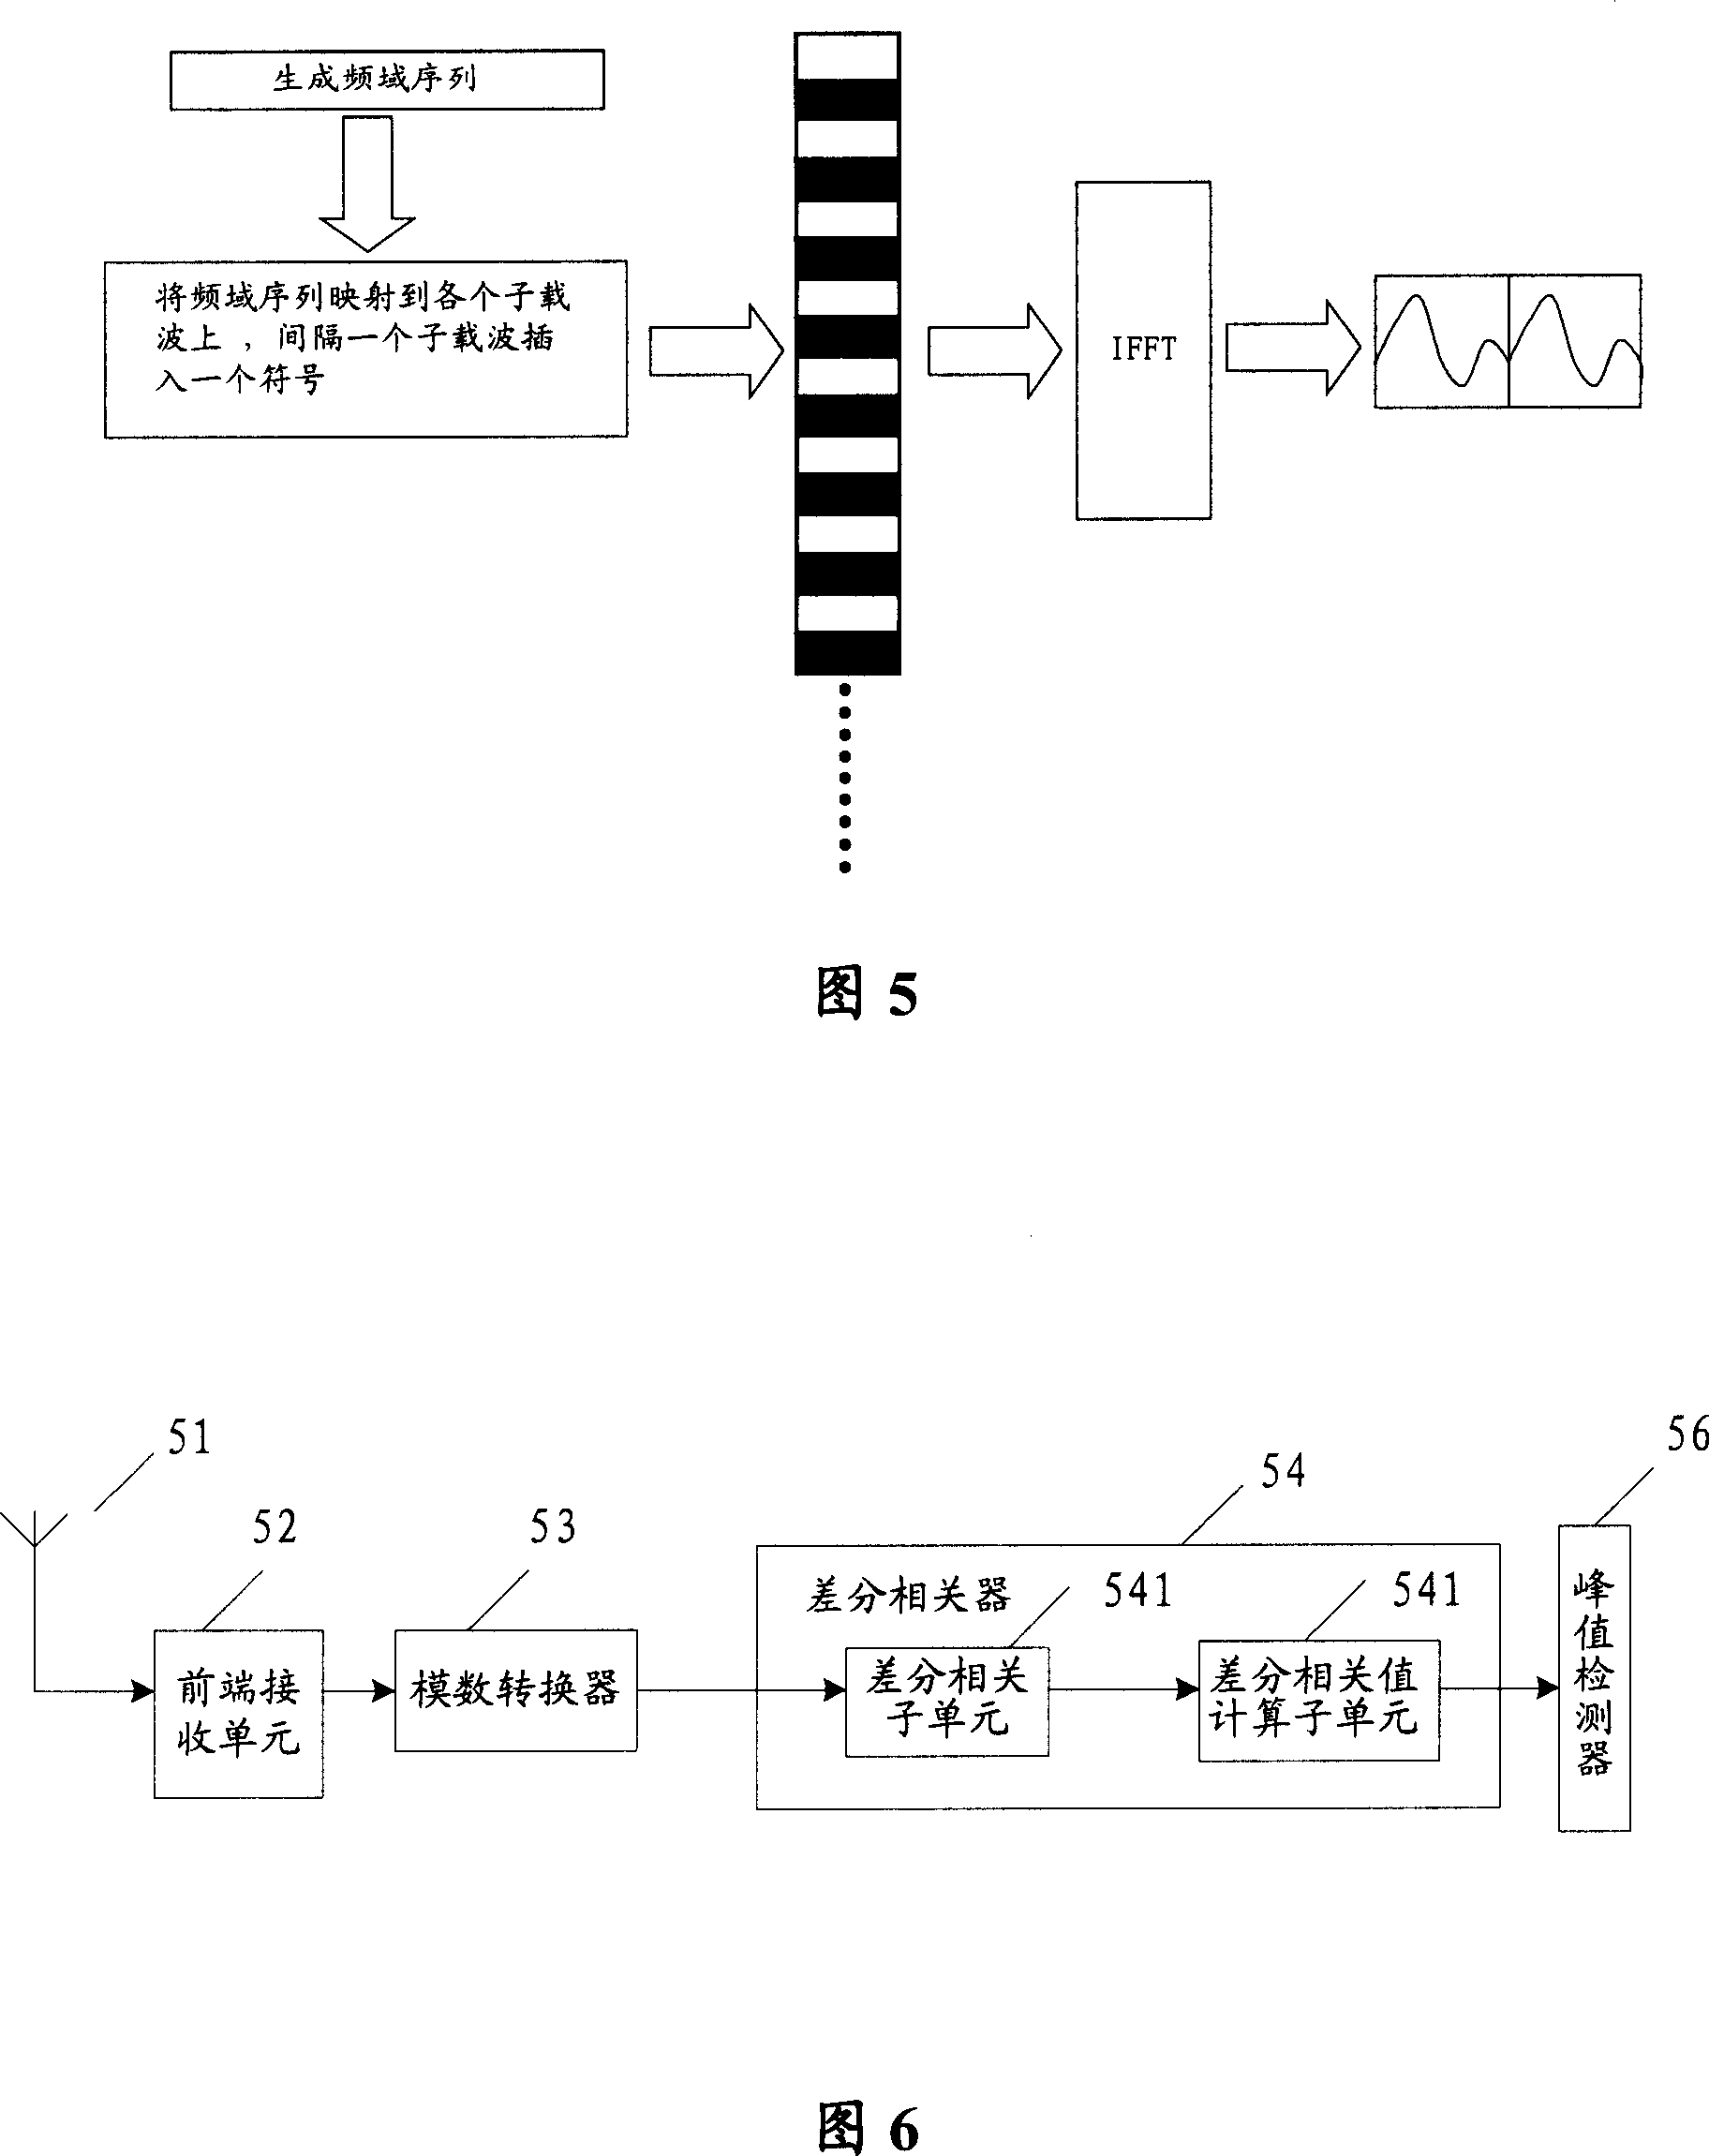 Downlink synchronization method and device of the mobile communication system